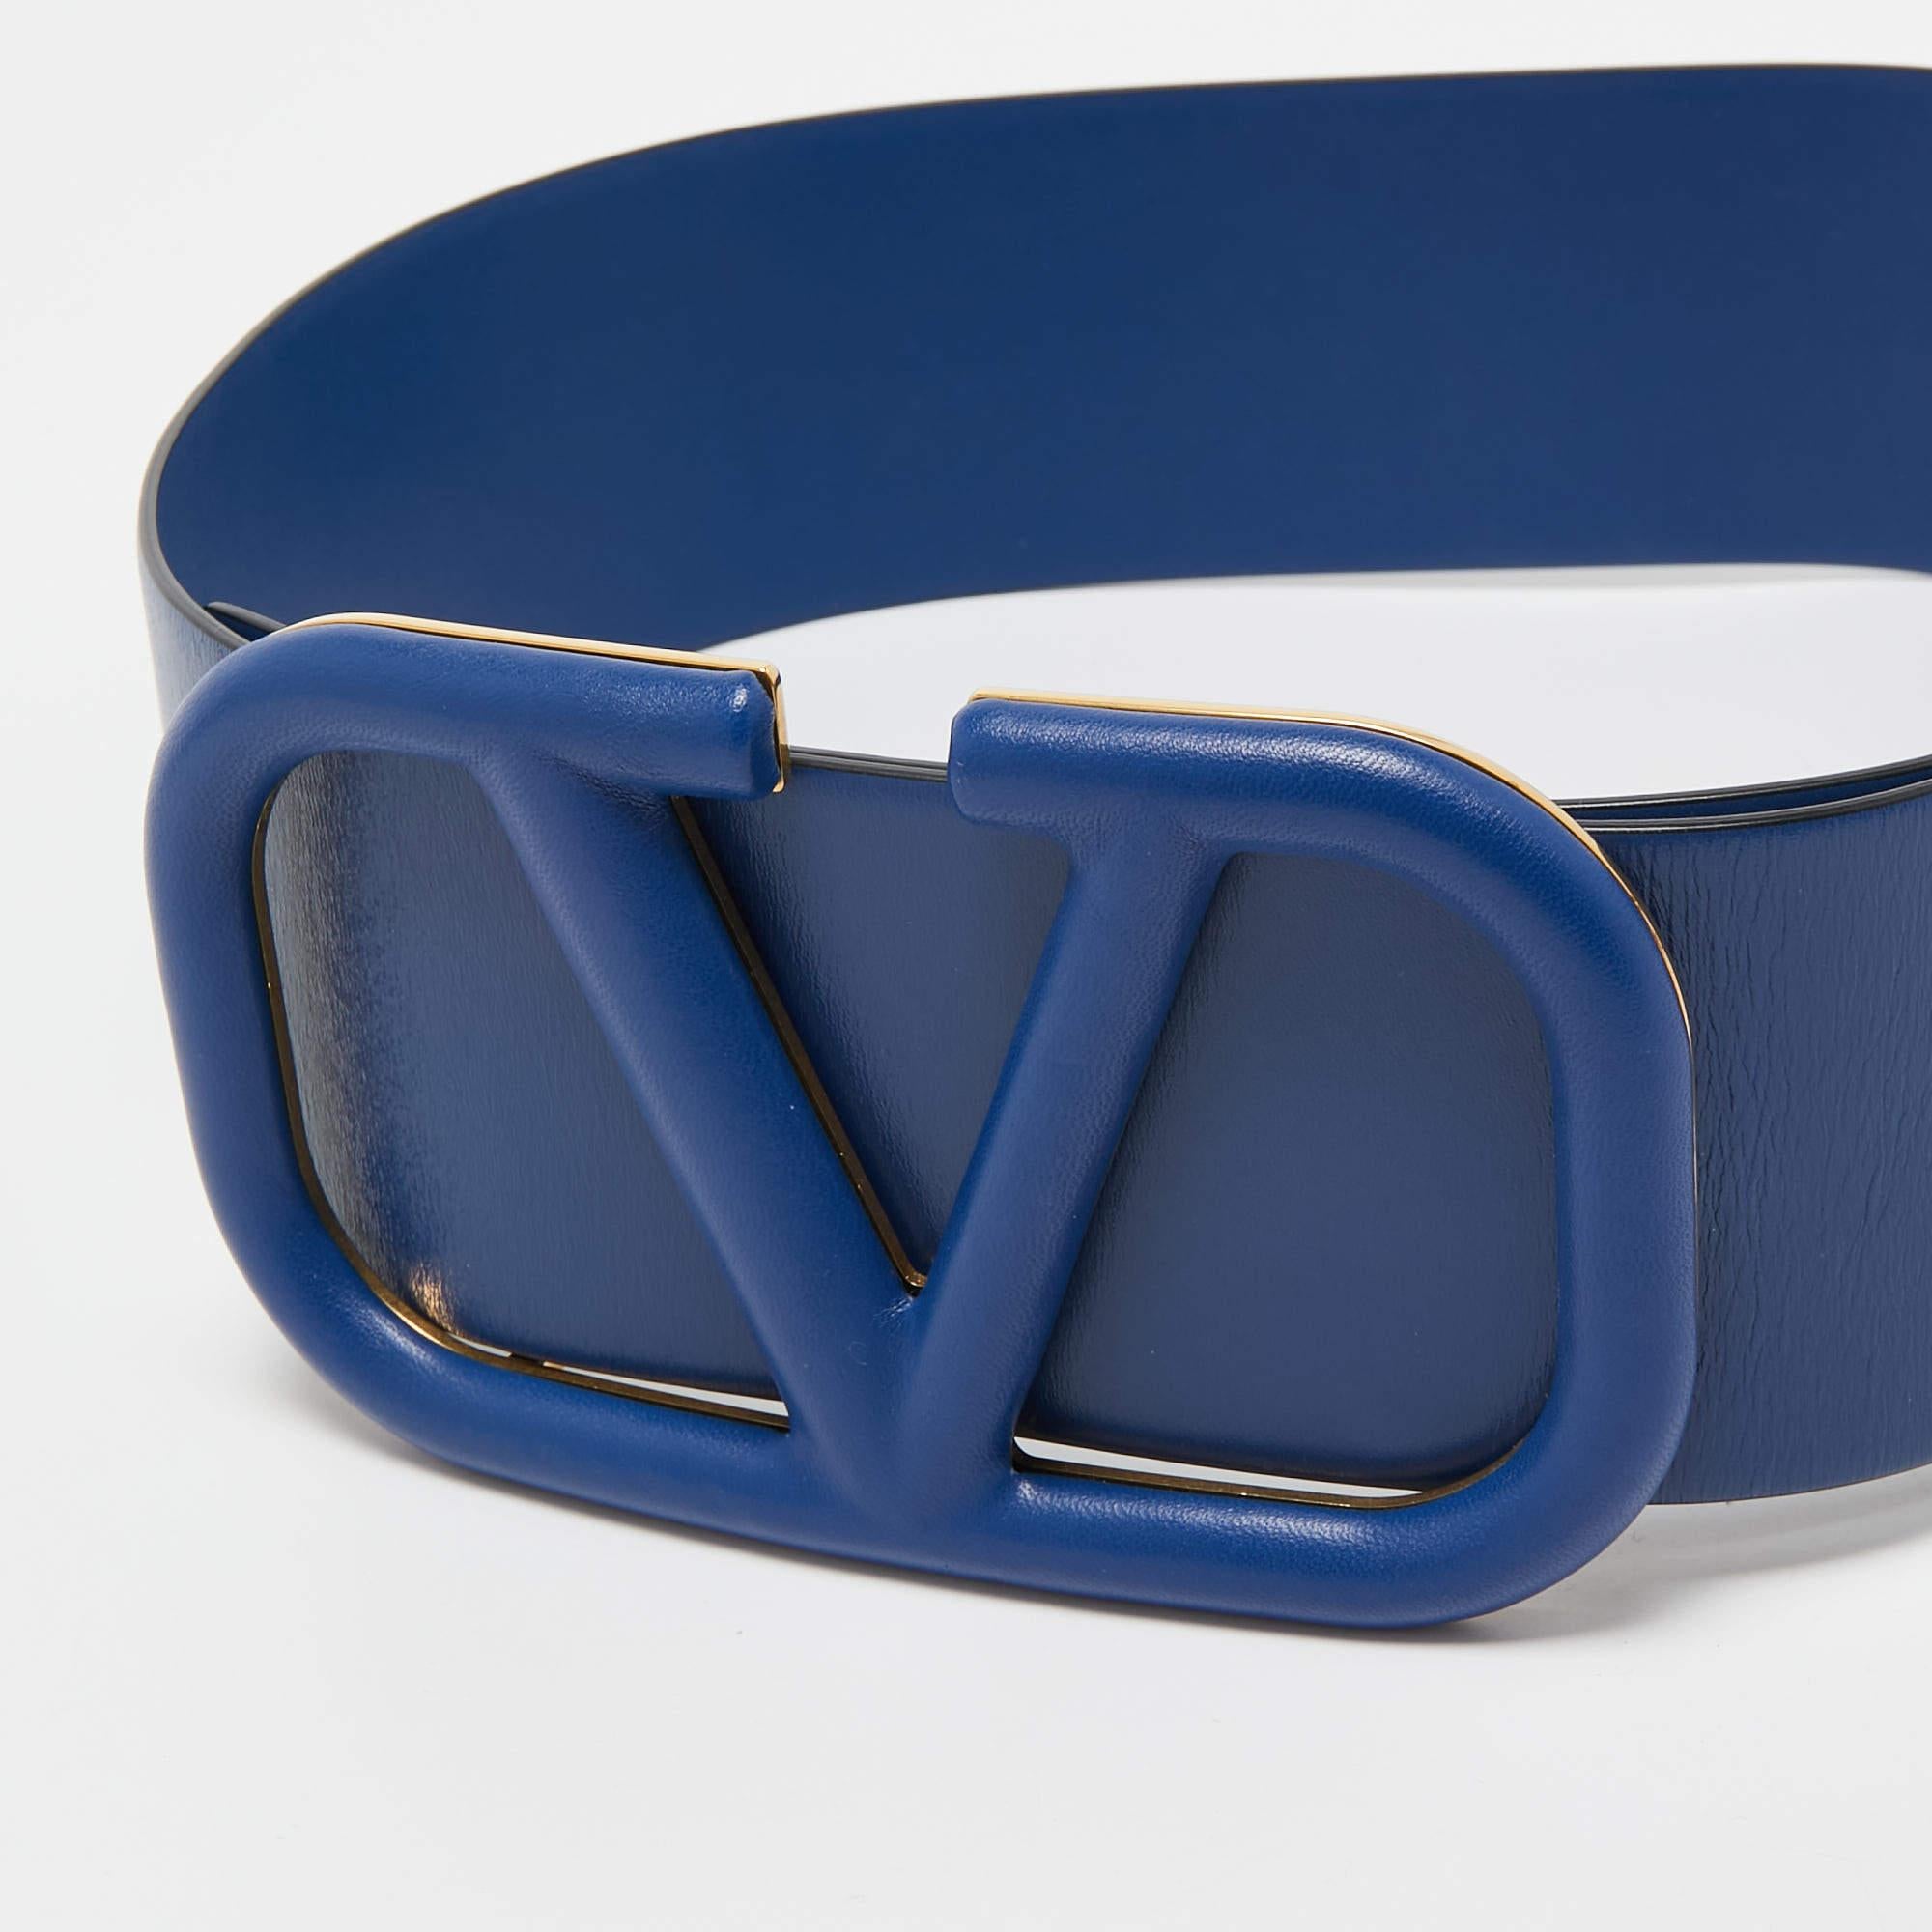 One of the most popular creations by Valentino, this belt is crafted from leather in shades of blue. It features the iconic VLogo buckle in gold-tone metal for an opulent signature appeal.

